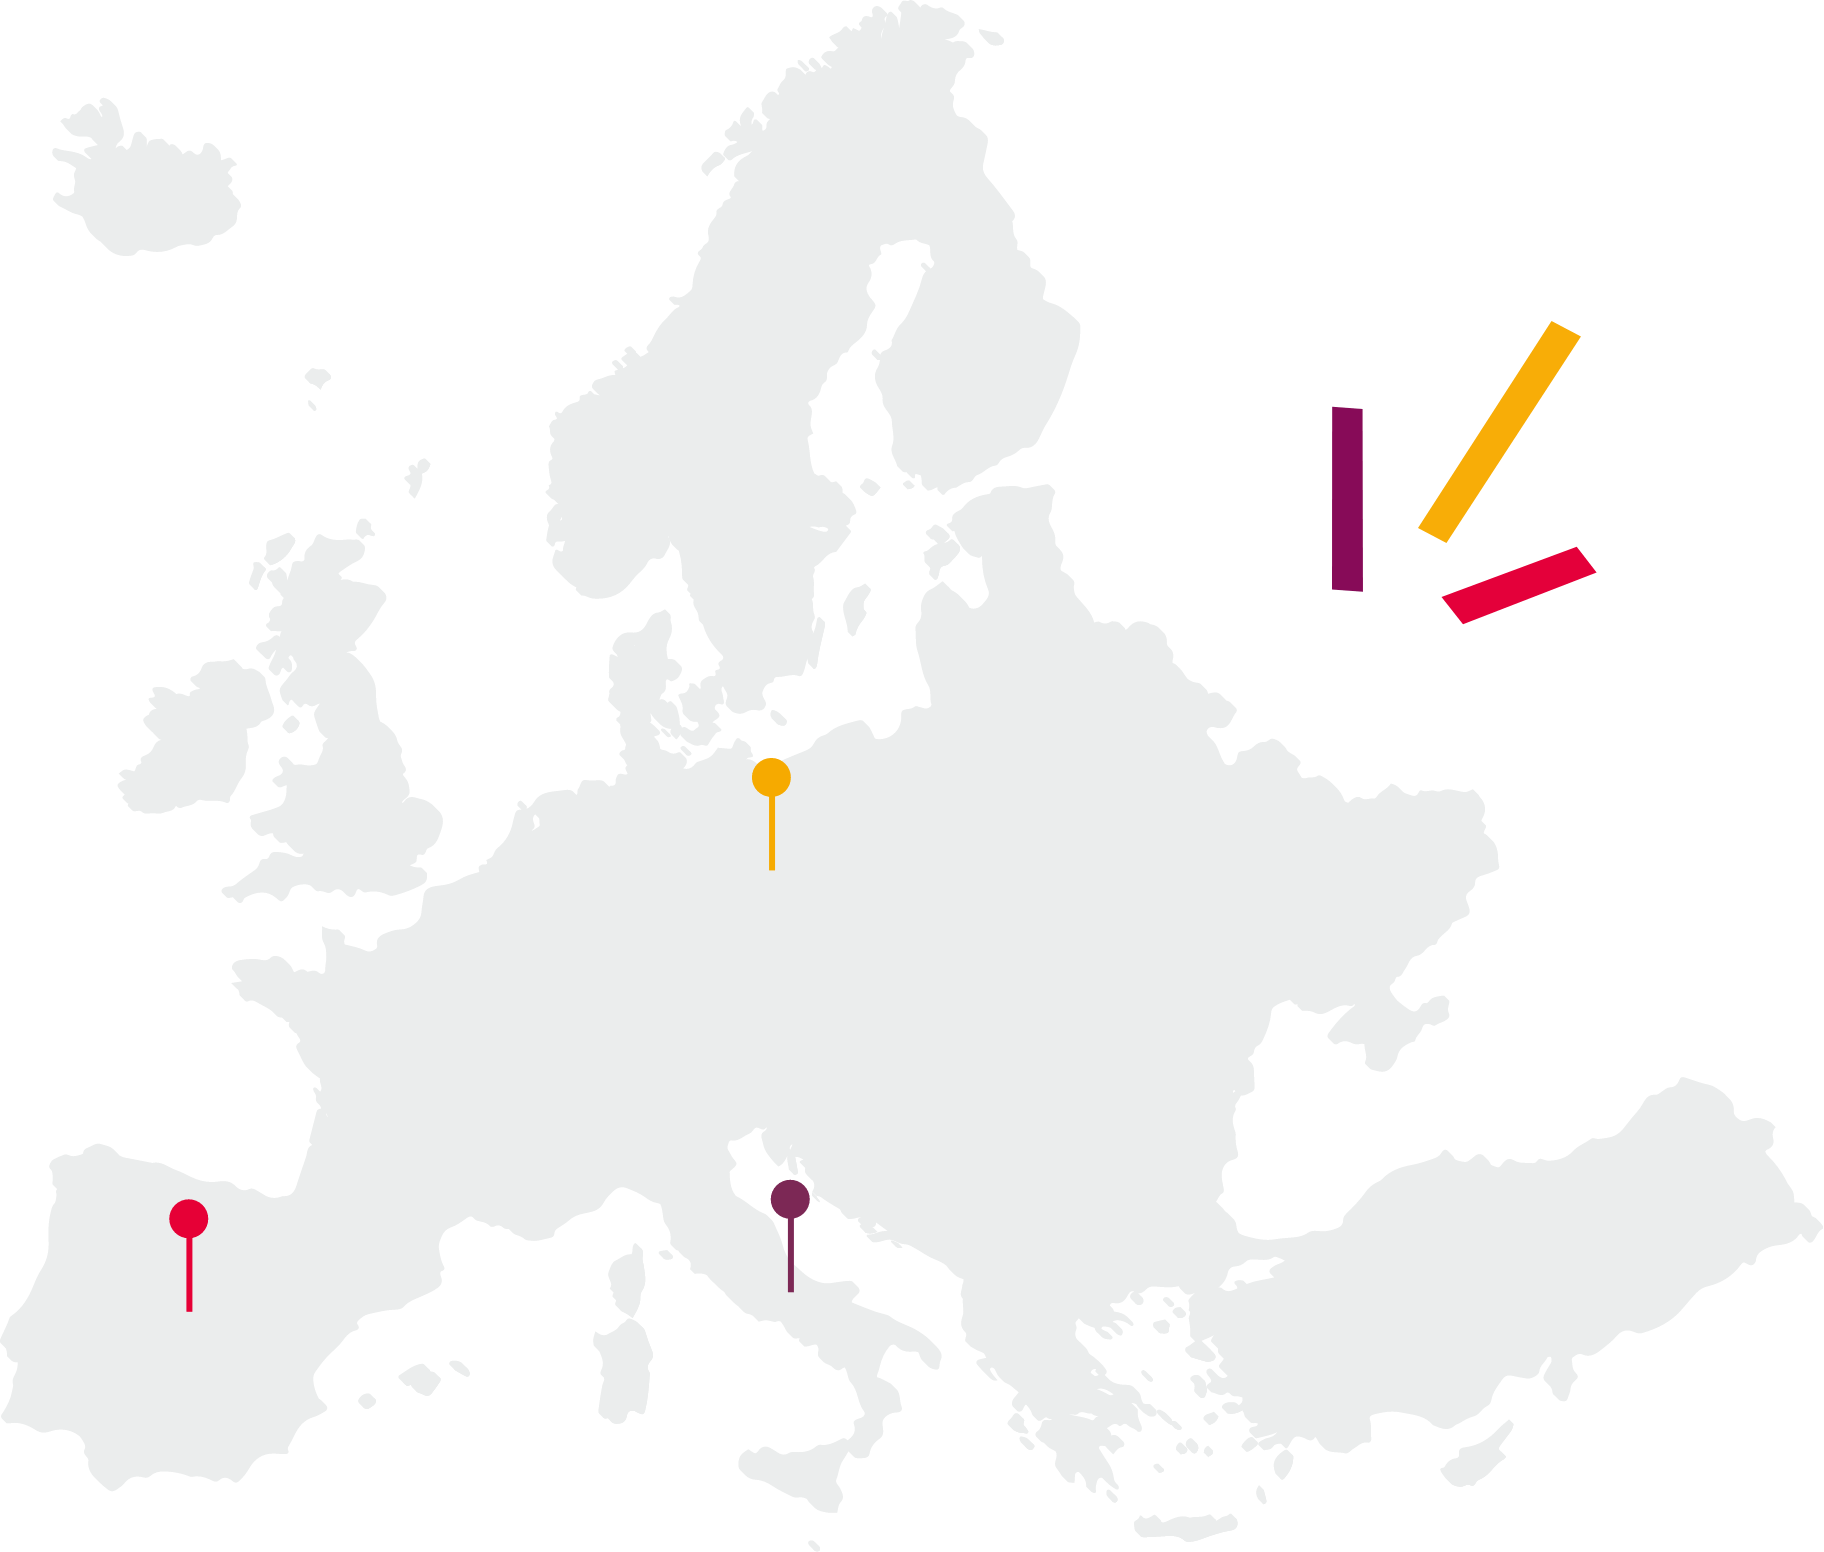 Locations of the 3 new offices in Europe